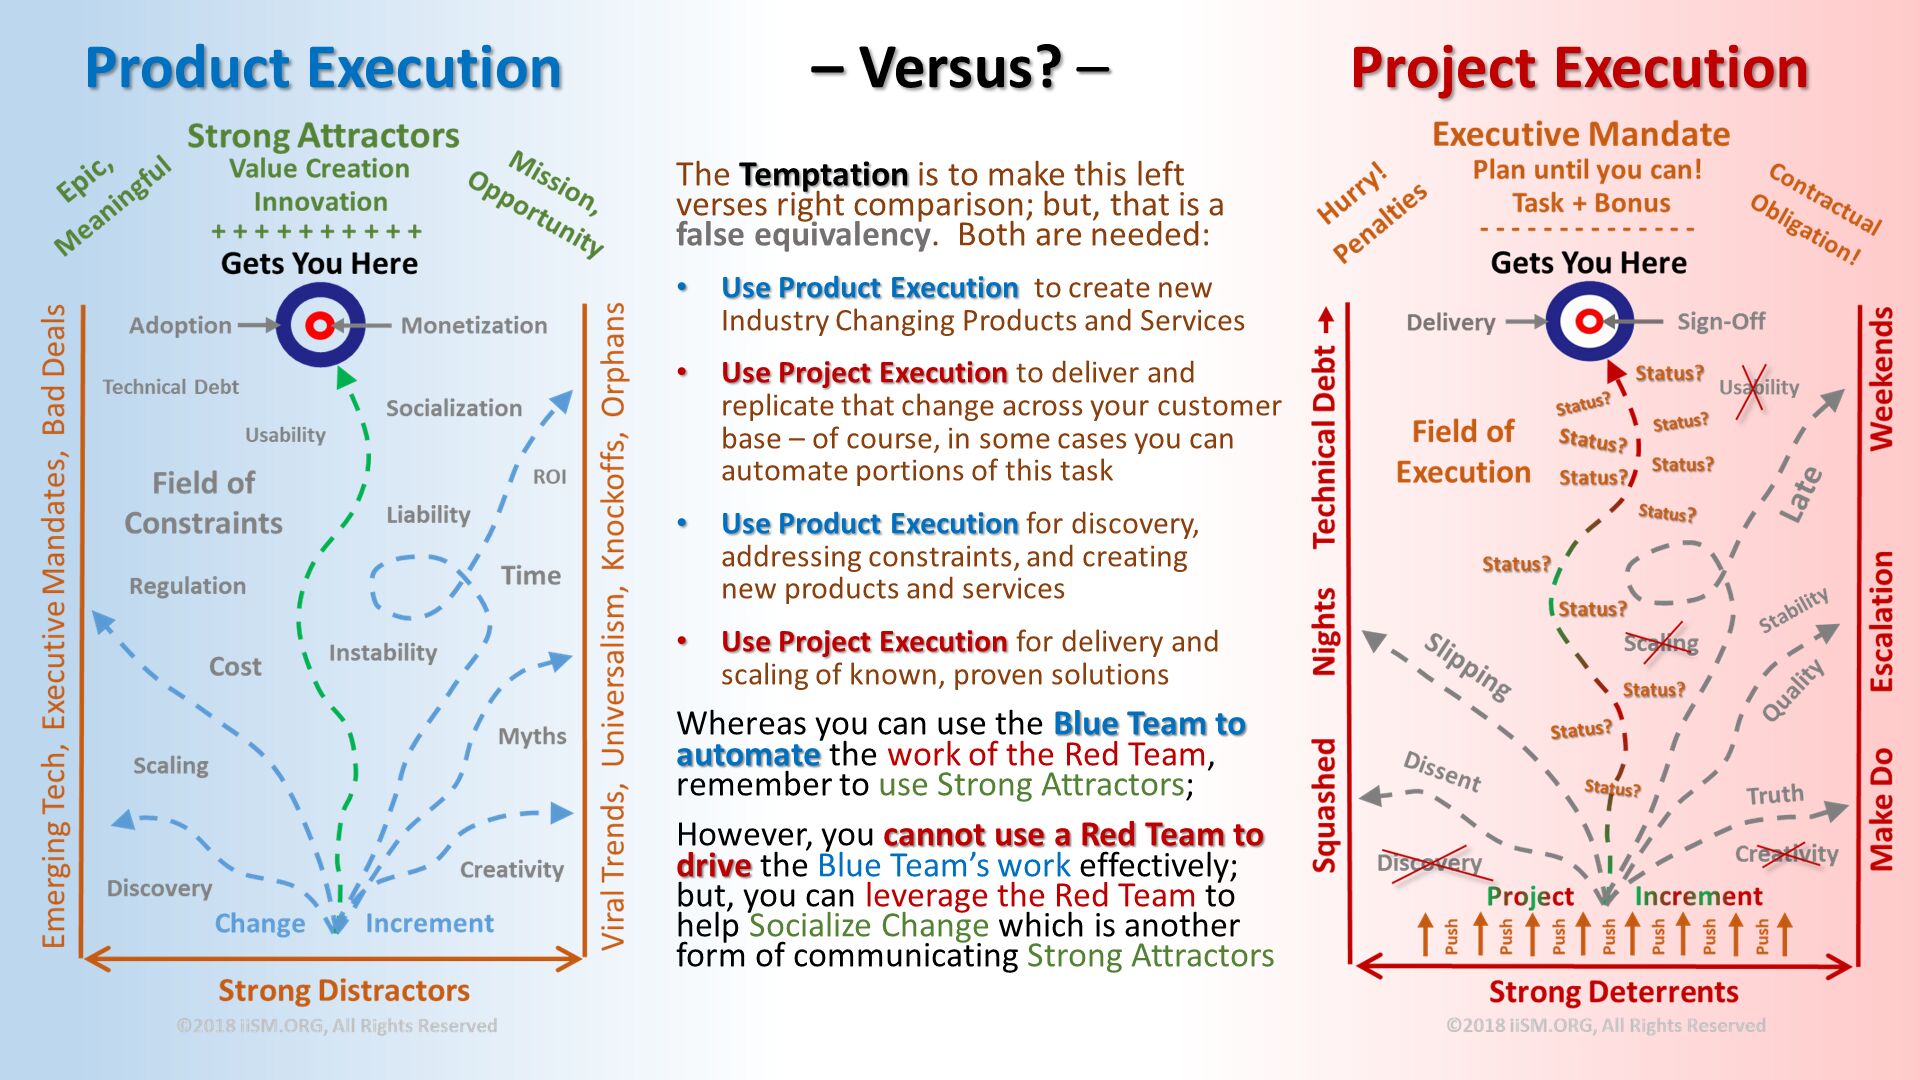 Product Execution                 – Versus? –                 Project Execution. The Temptation is to make this left verses right comparison; but, that is a false equivalency.  Both are needed:
Use Product Execution  to create new Industry Changing Products and Services
Use Project Execution to deliver and replicate that change across your customer base – of course, in some cases you can automate portions of this task
Use Product Execution for discovery, addressing constraints, and creating new products and services
Use Project Execution for delivery and scaling of known, proven solutions
Whereas you can use the Blue Team to automate the work of the Red Team, remember to use Strong Attractors; However, you cannot use a Red Team to drive the Blue Team’s work effectively; but, you can leverage the Red Team to help Socialize Change which is another form of communicating Strong Attractors. 